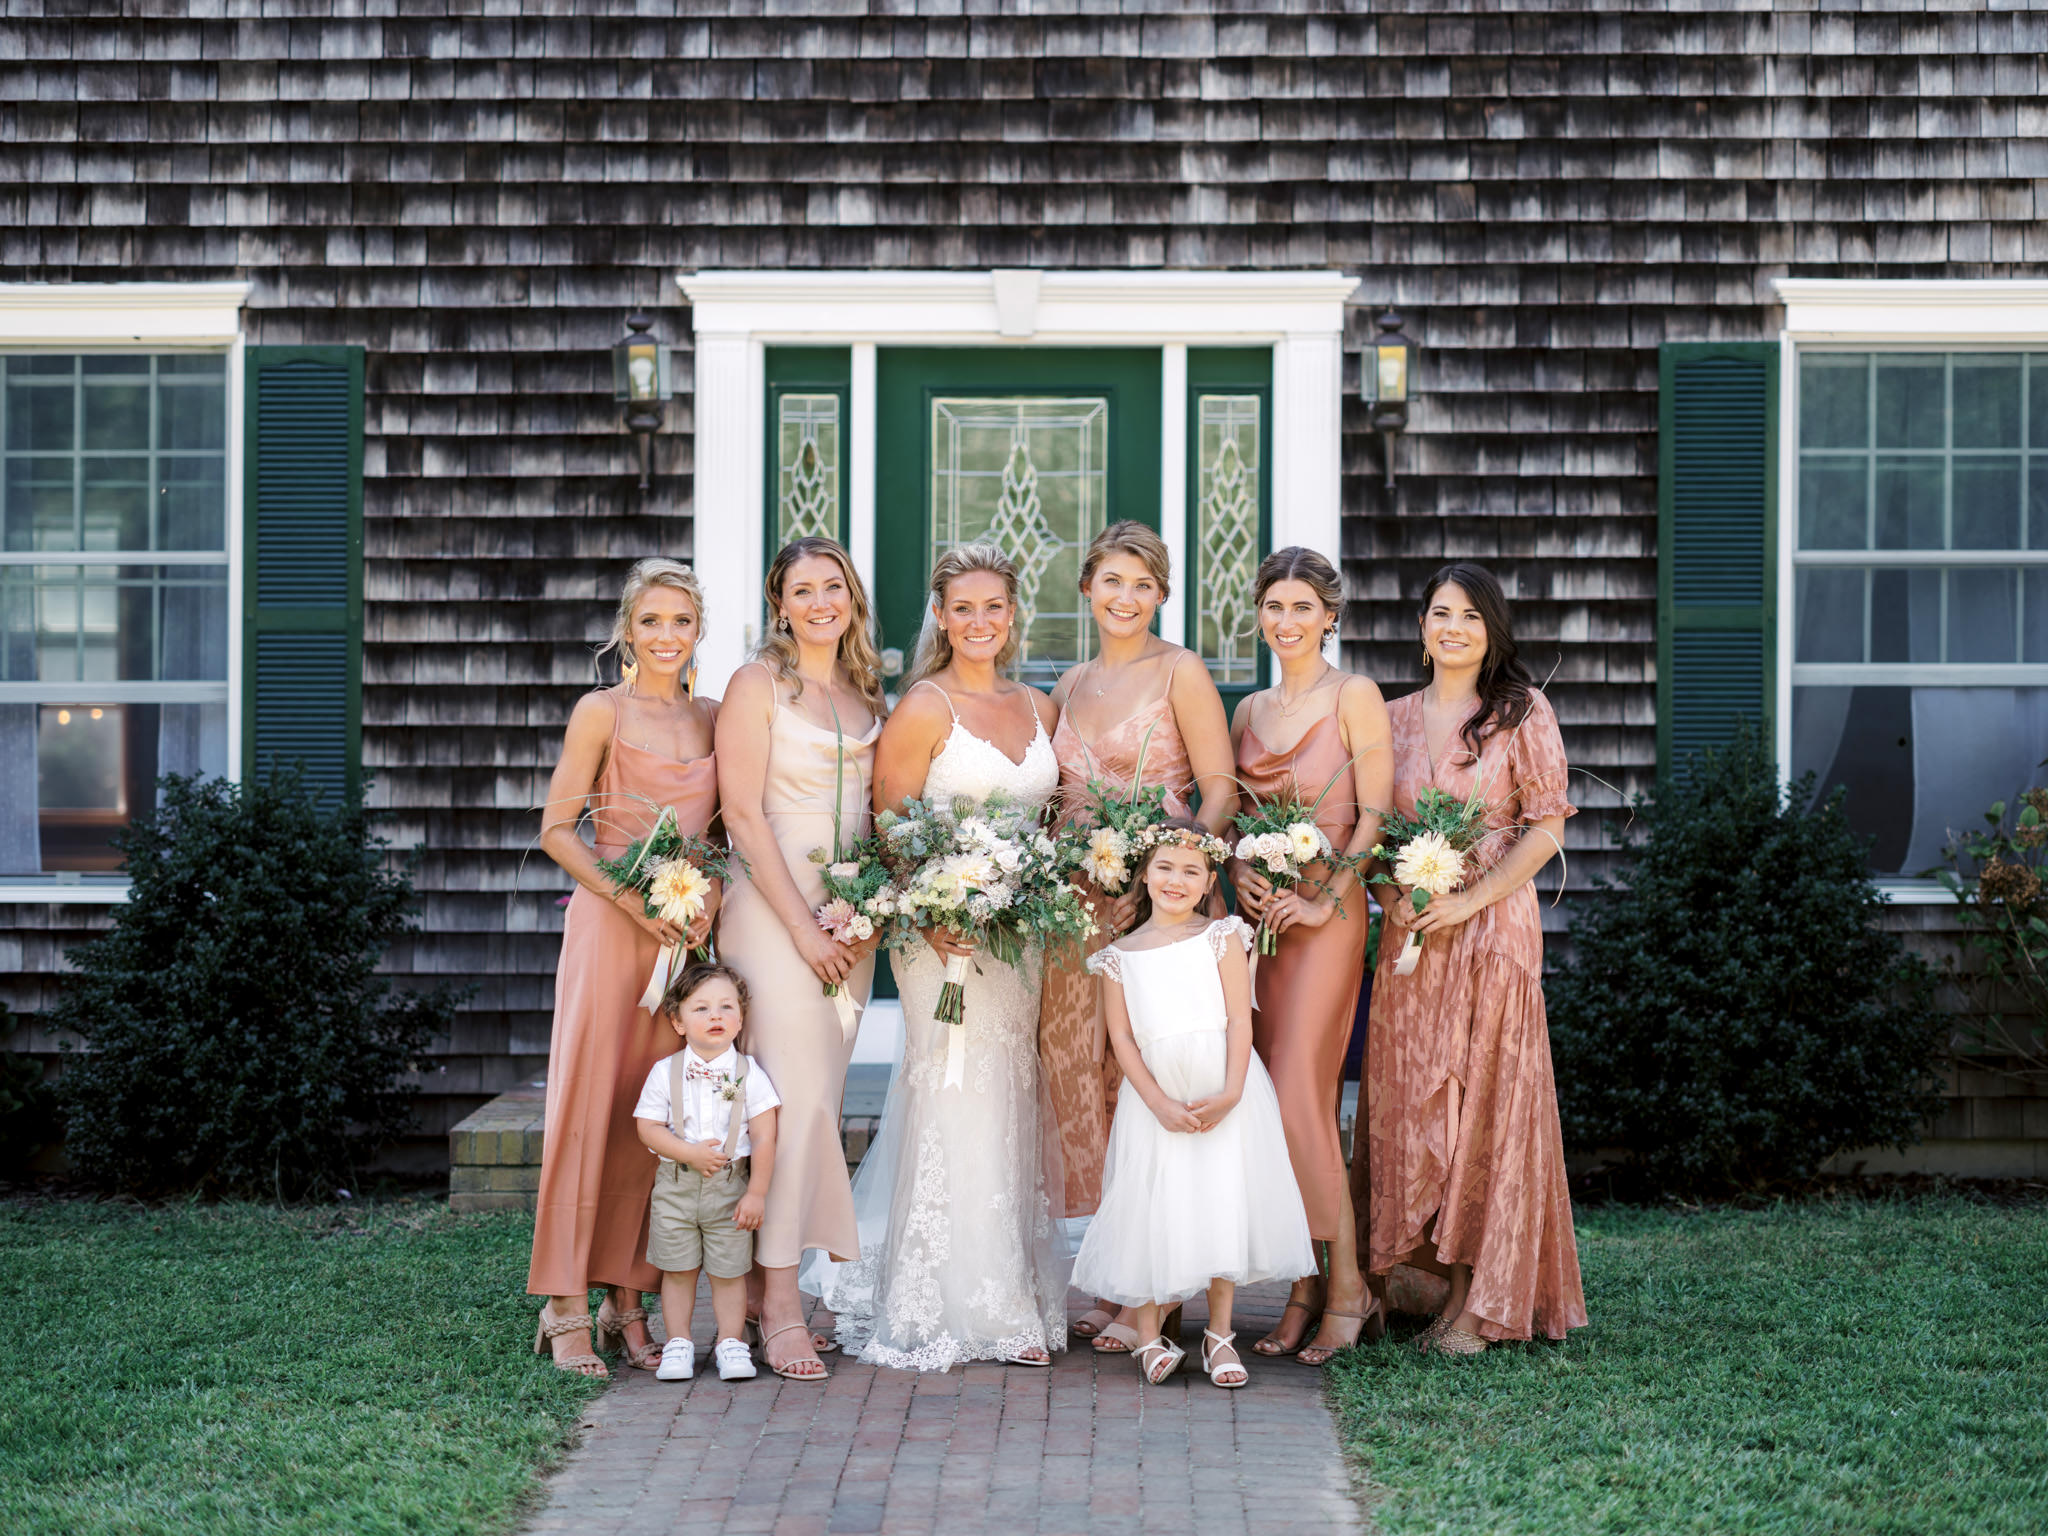 The bride, bridesmaids, flower girl, and ring bearer are in front of a house. 2022 wedding trends image by Jenny Fu Studio 